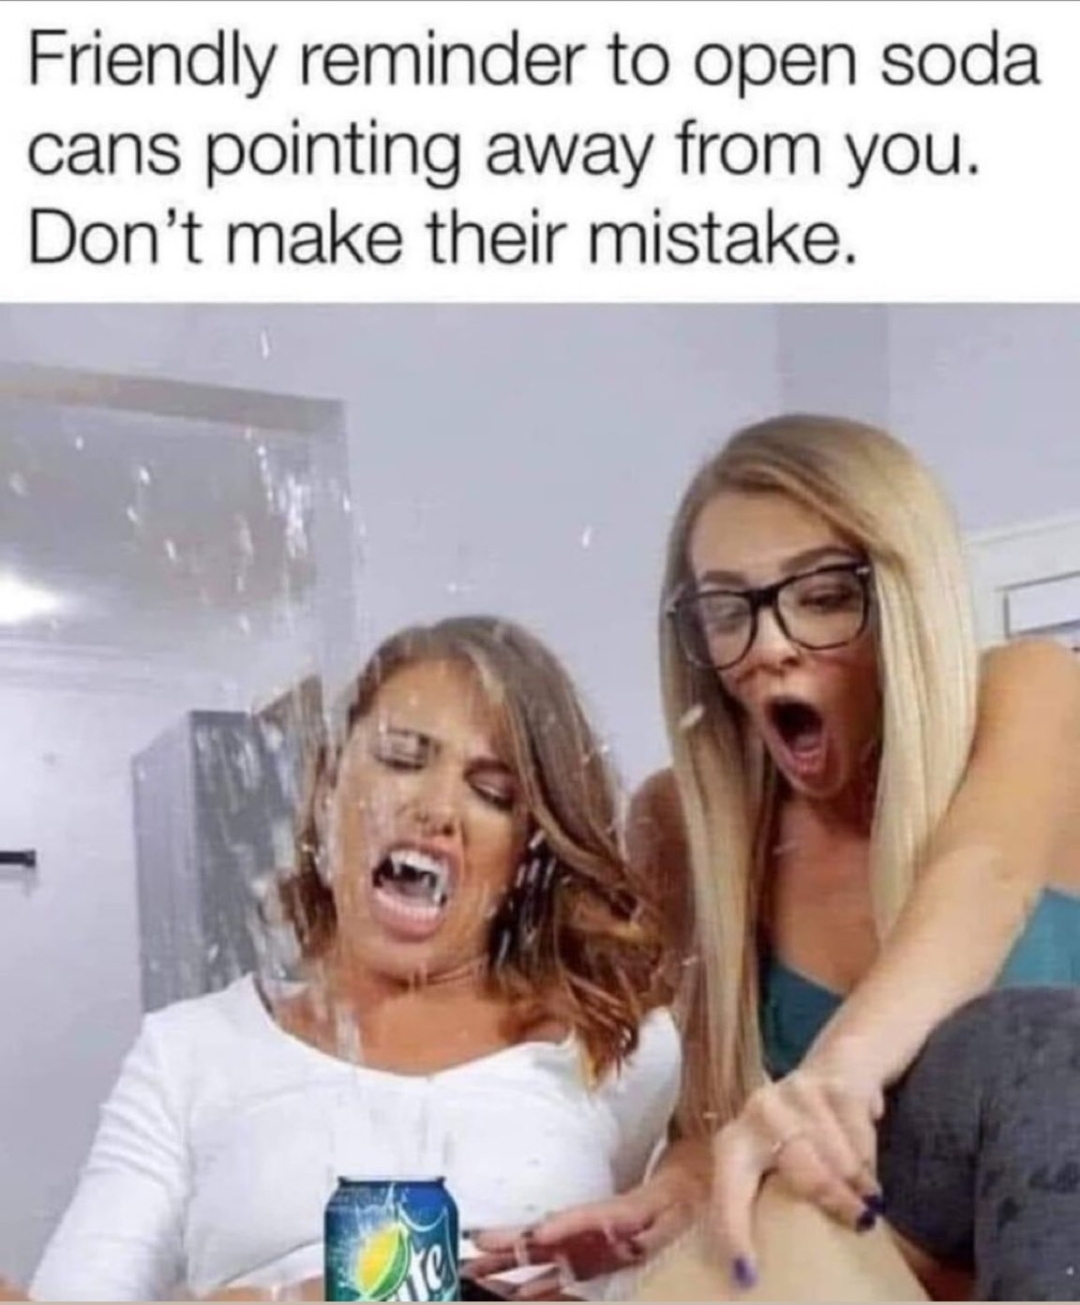 spicy memes and dirty pics - friendly reminder to open soda cans away - Friendly reminder to open soda cans pointing away from you. Don't make their mistake.